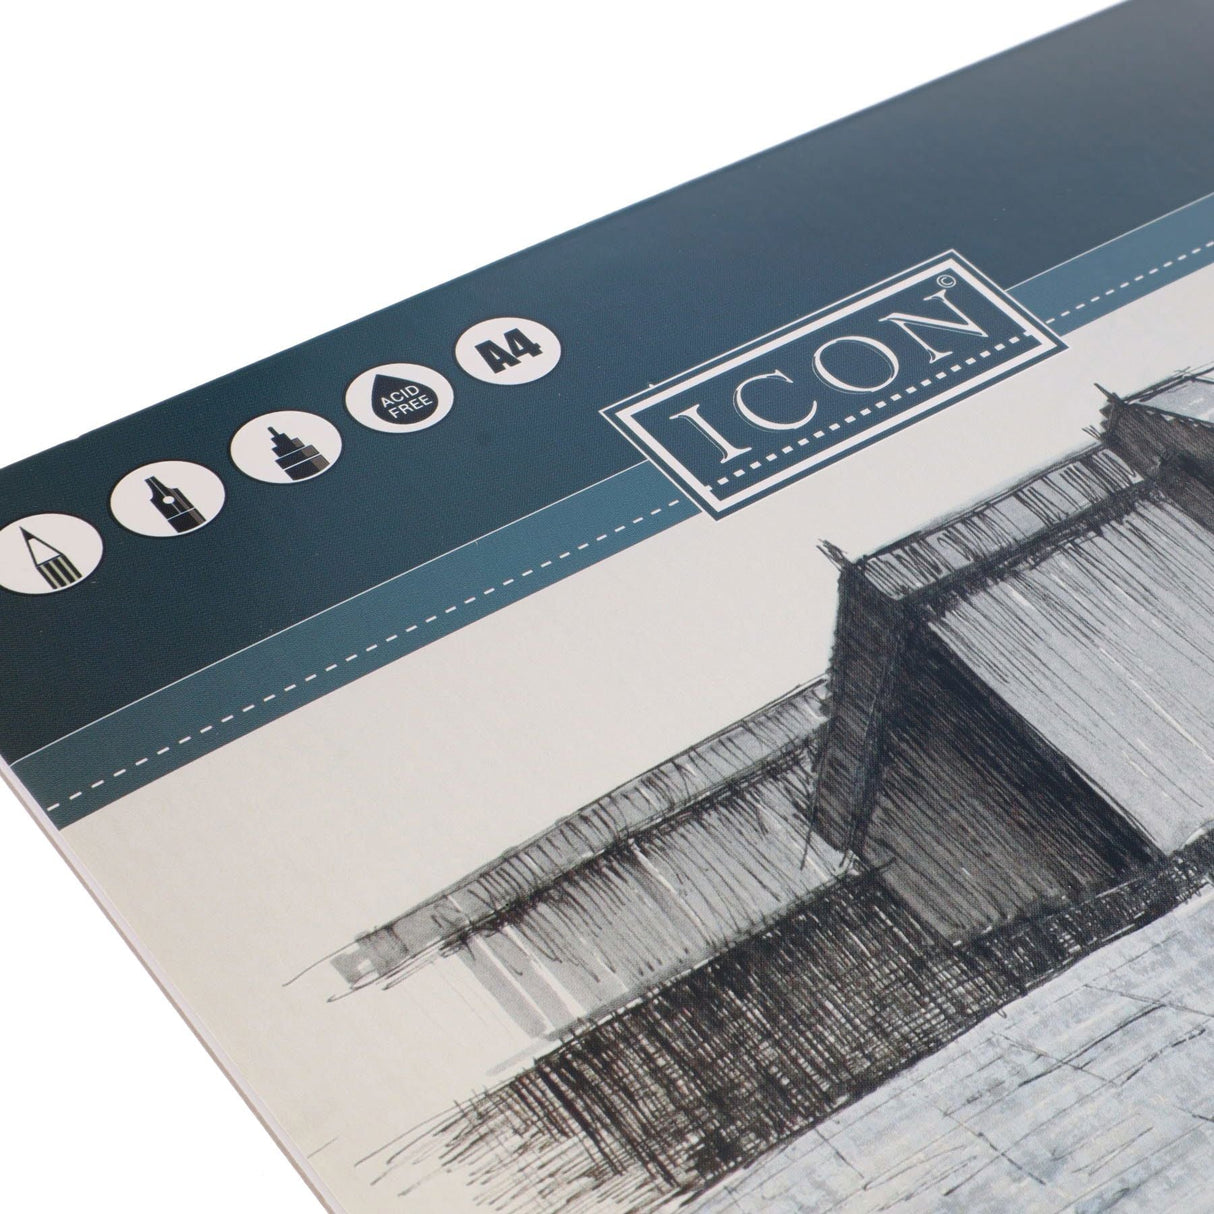 Icon A4 Tracing Paper Pad - 65gsm - 25 Sheets-Drawing & Painting Paper-Icon | Buy Online at Stationery Shop